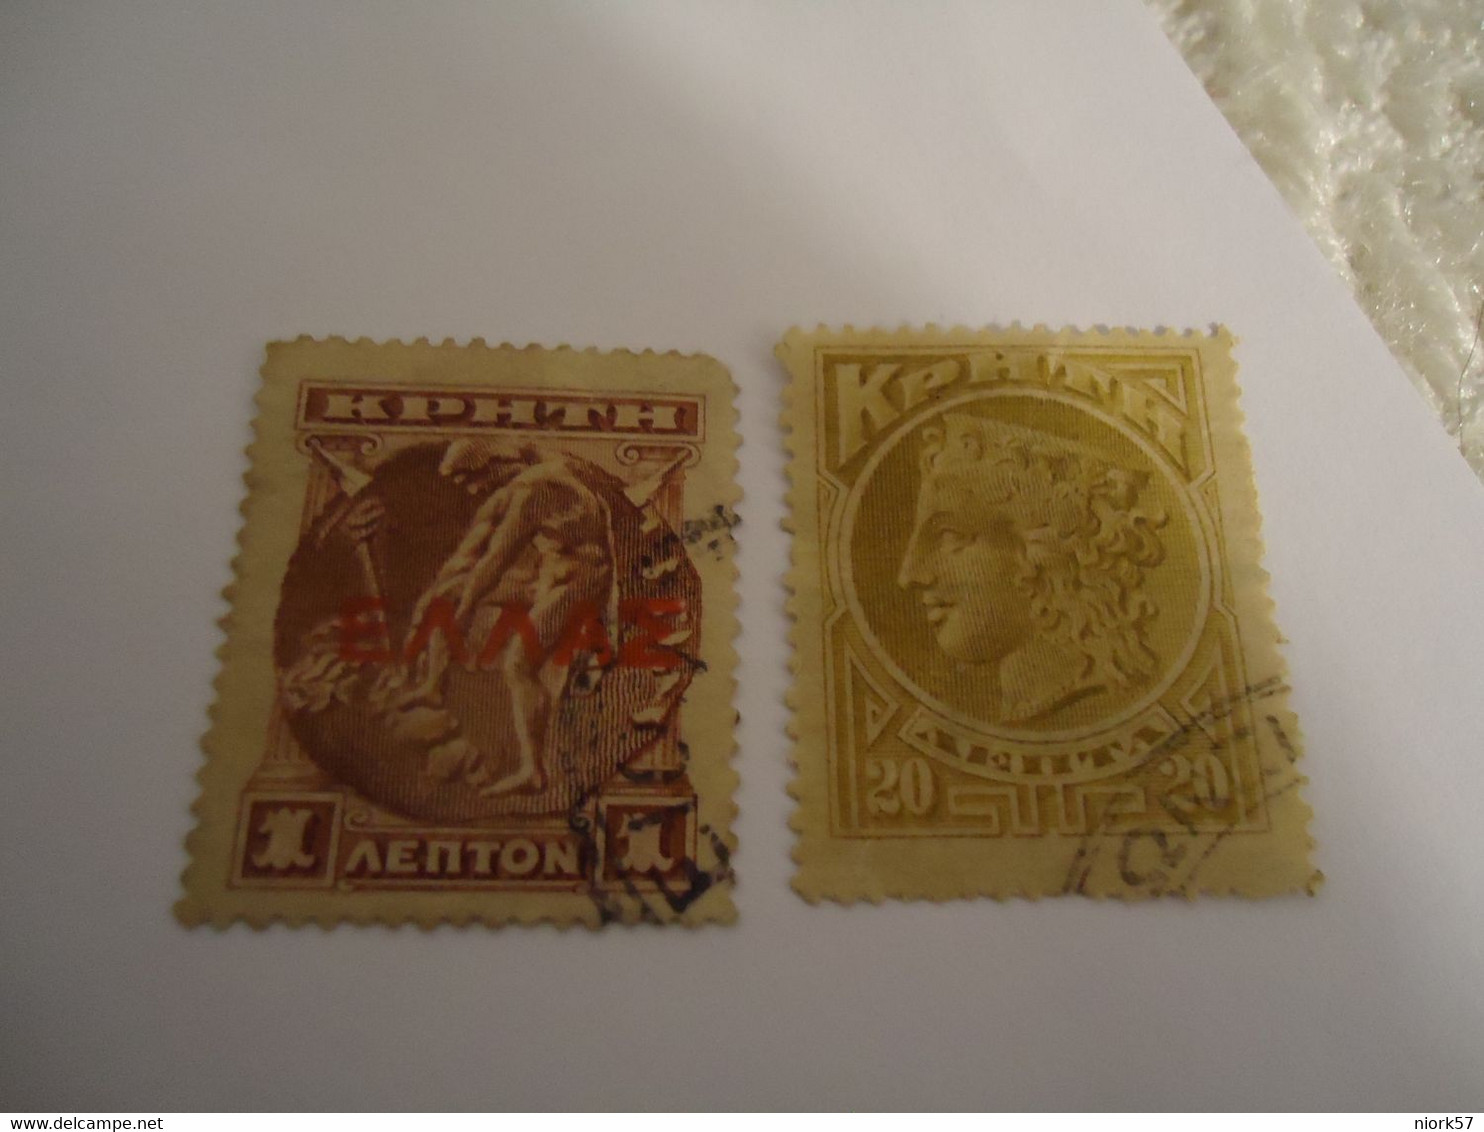 CRETE  GREECE USED STAMPS 2 - Unclassified